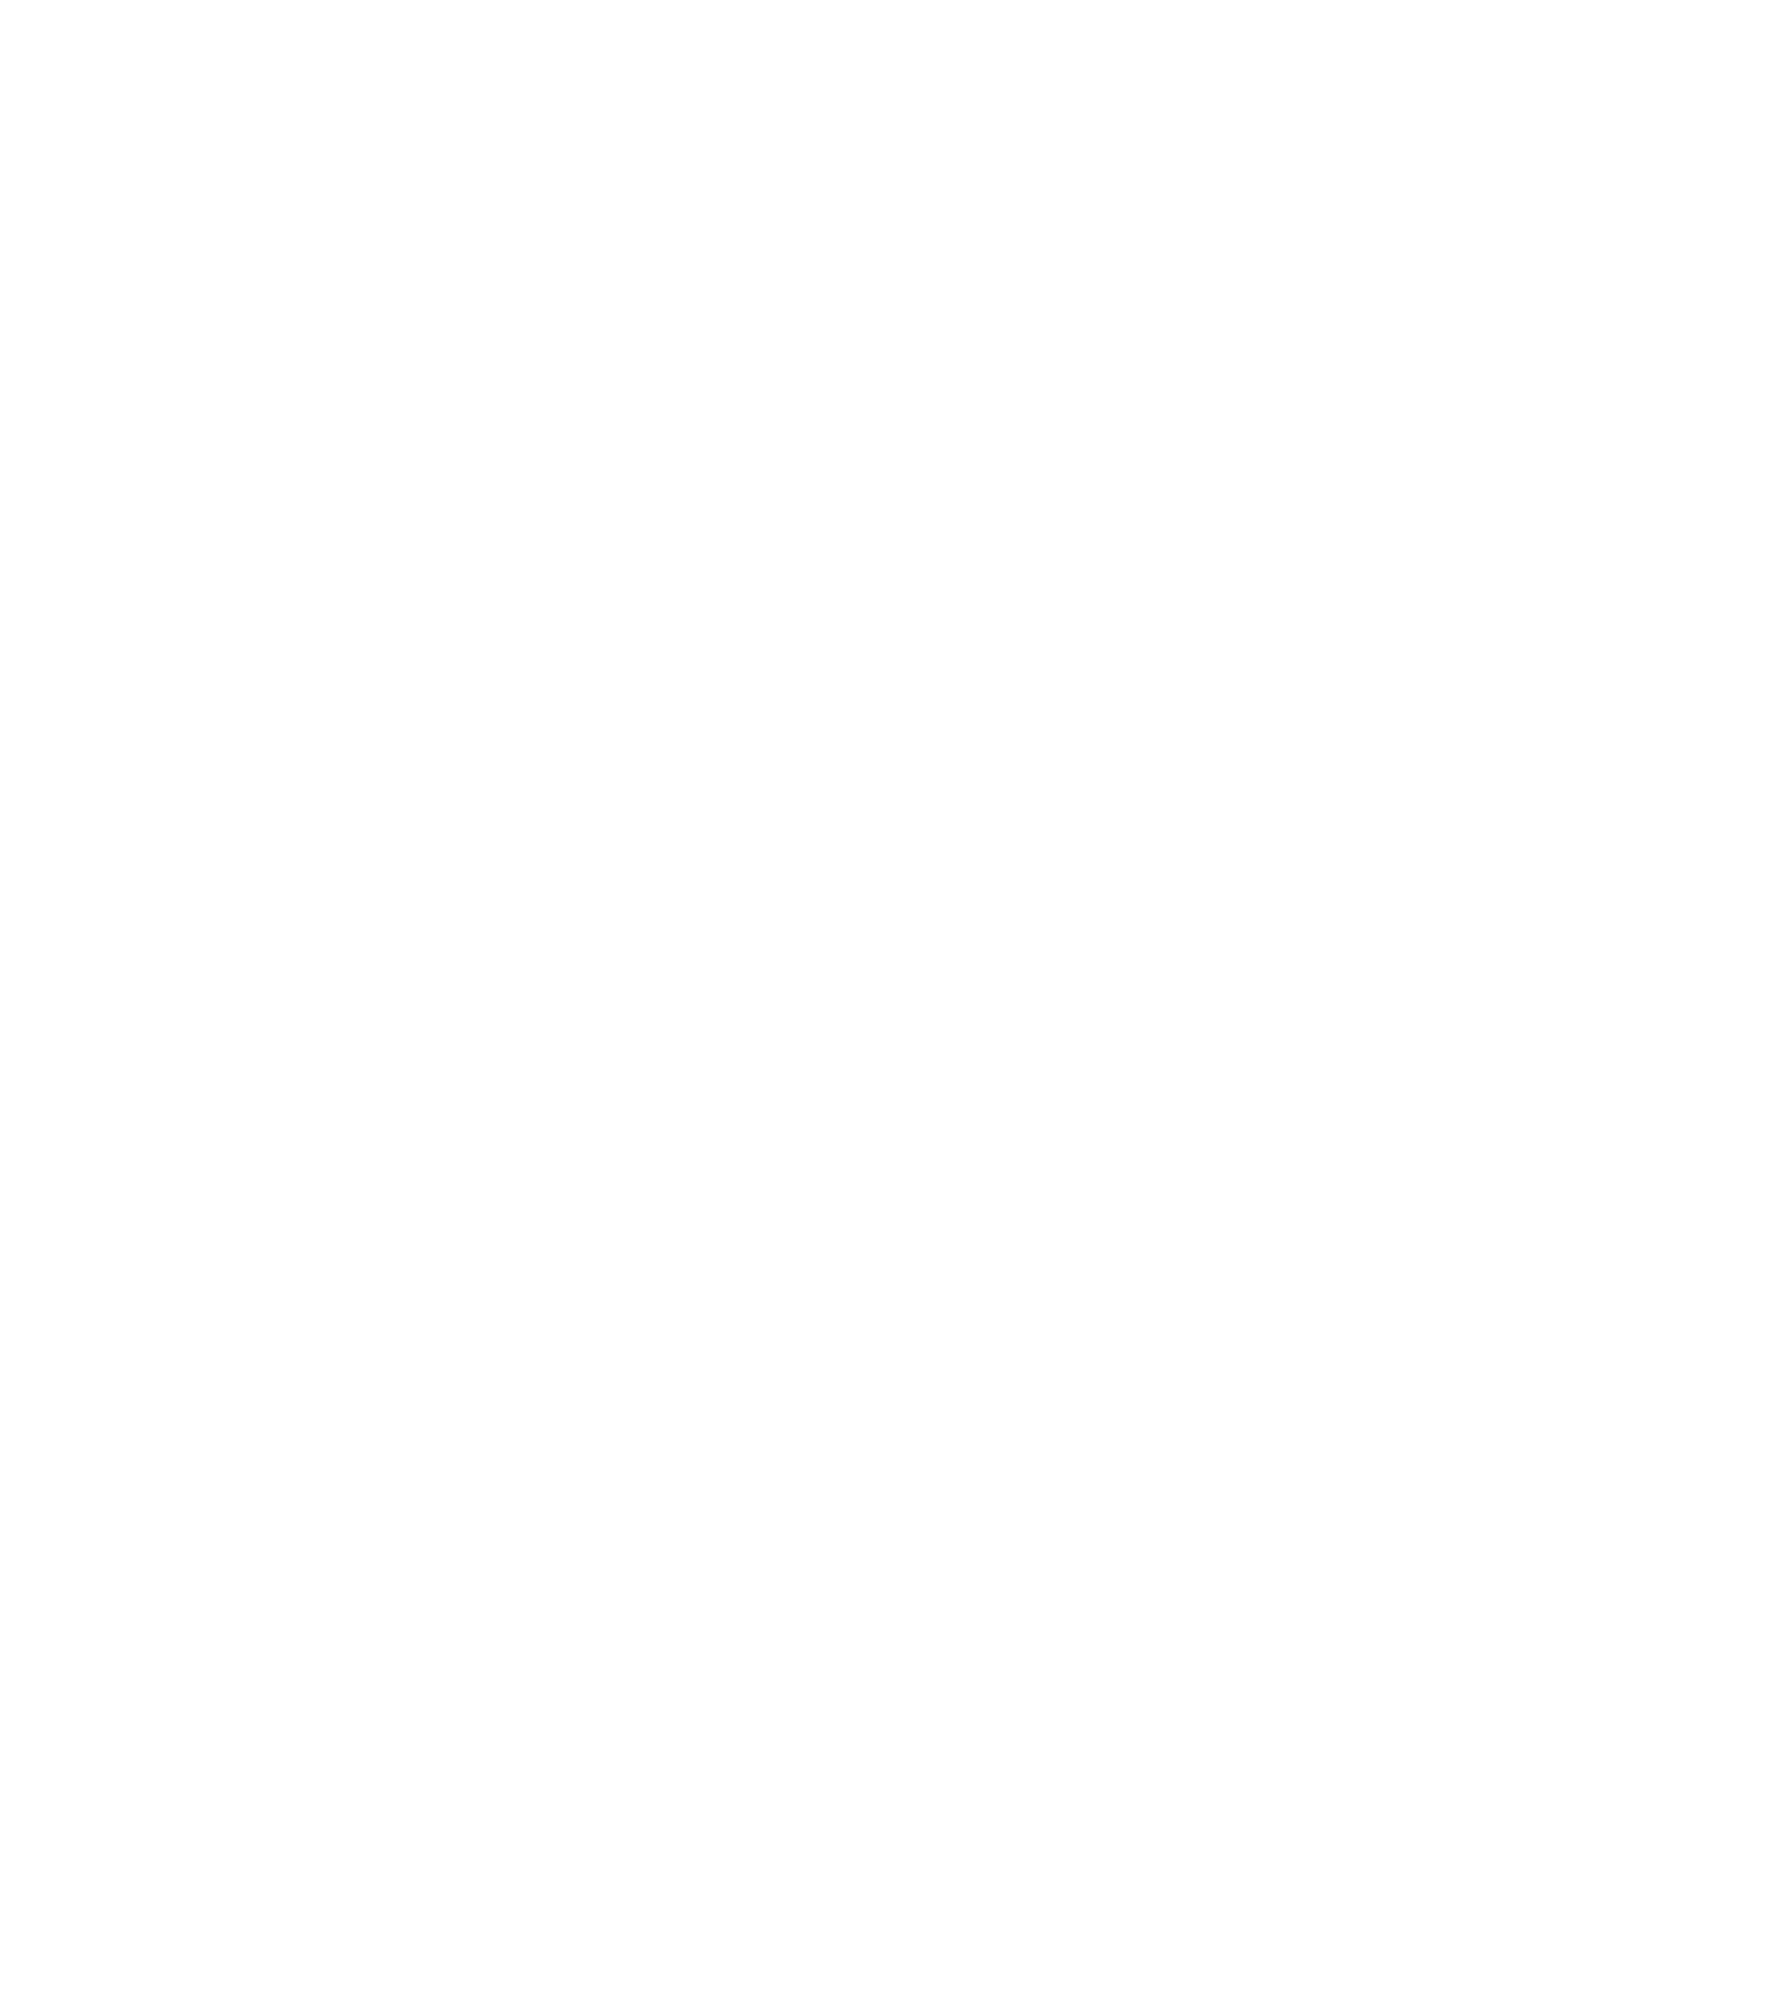 VNSG_logo_outline_payoff_wit